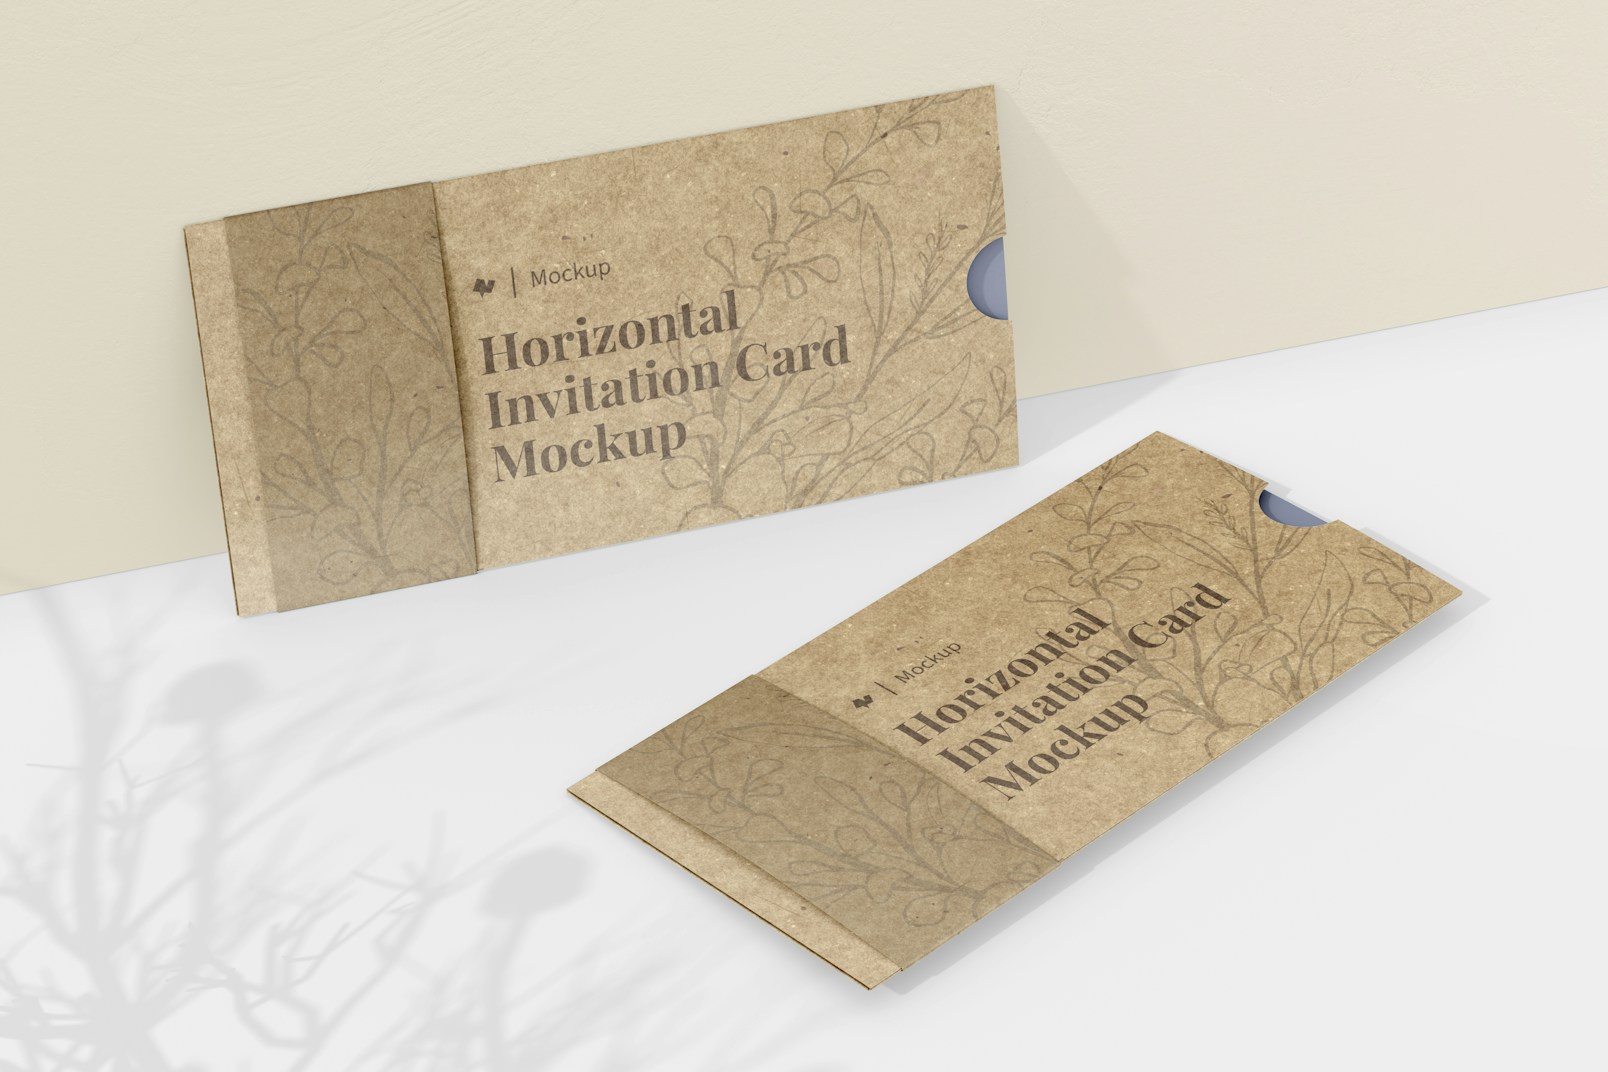 Horizontal Invitation Cards Mockup, Leaned and Dropped